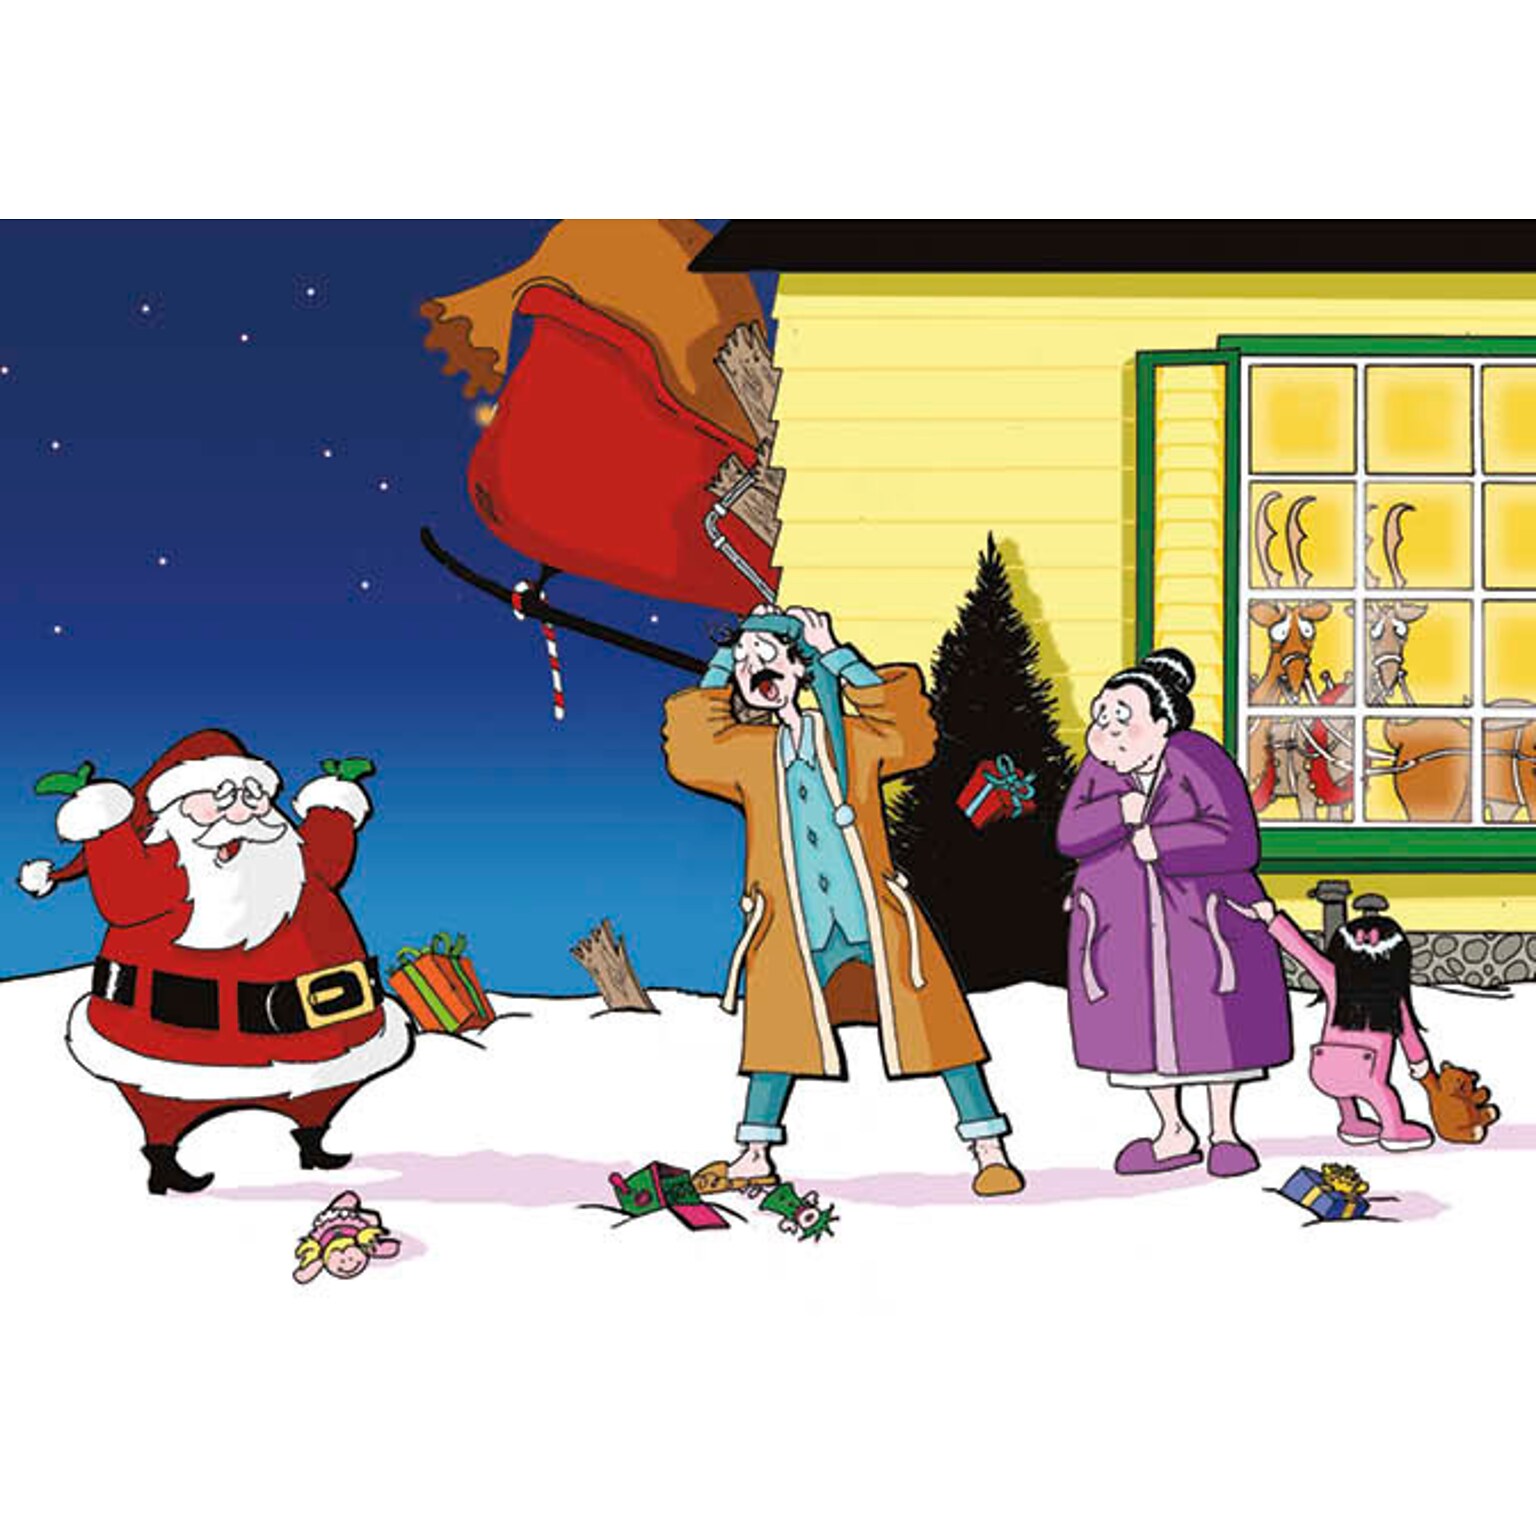 Cartoon Santa Crashed Sleigh Humerous Christmas Greeting Cards, With A7 Envelopes, 7 x 5, 25 Cards per Set